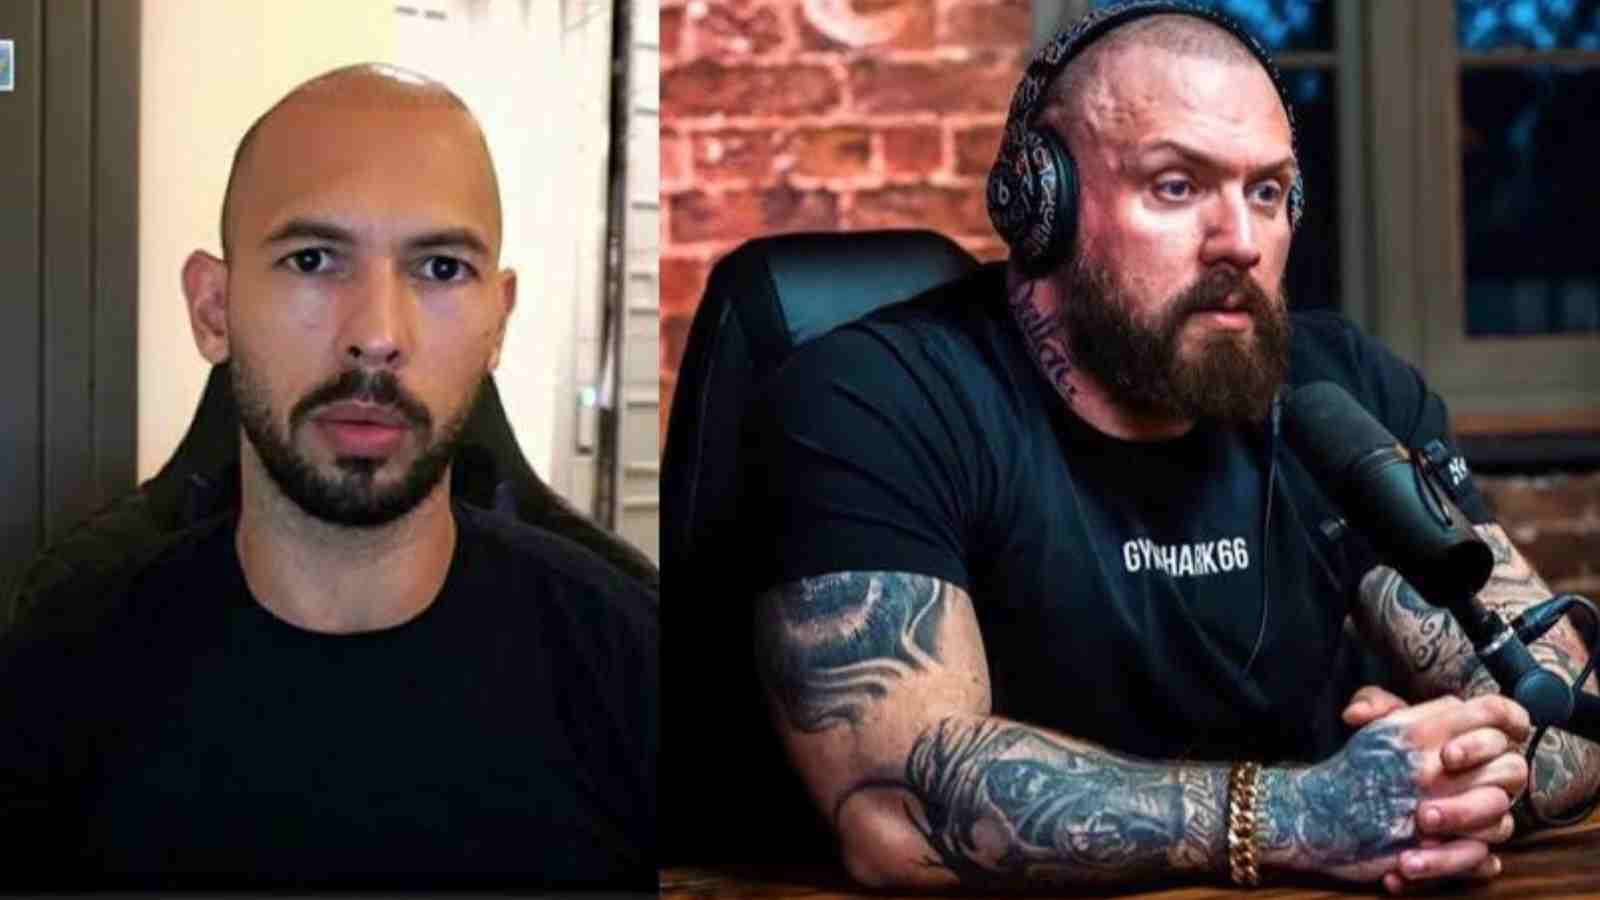 True Geordie apologises to Andrew Tate after getting accused of making Islamophobic comments